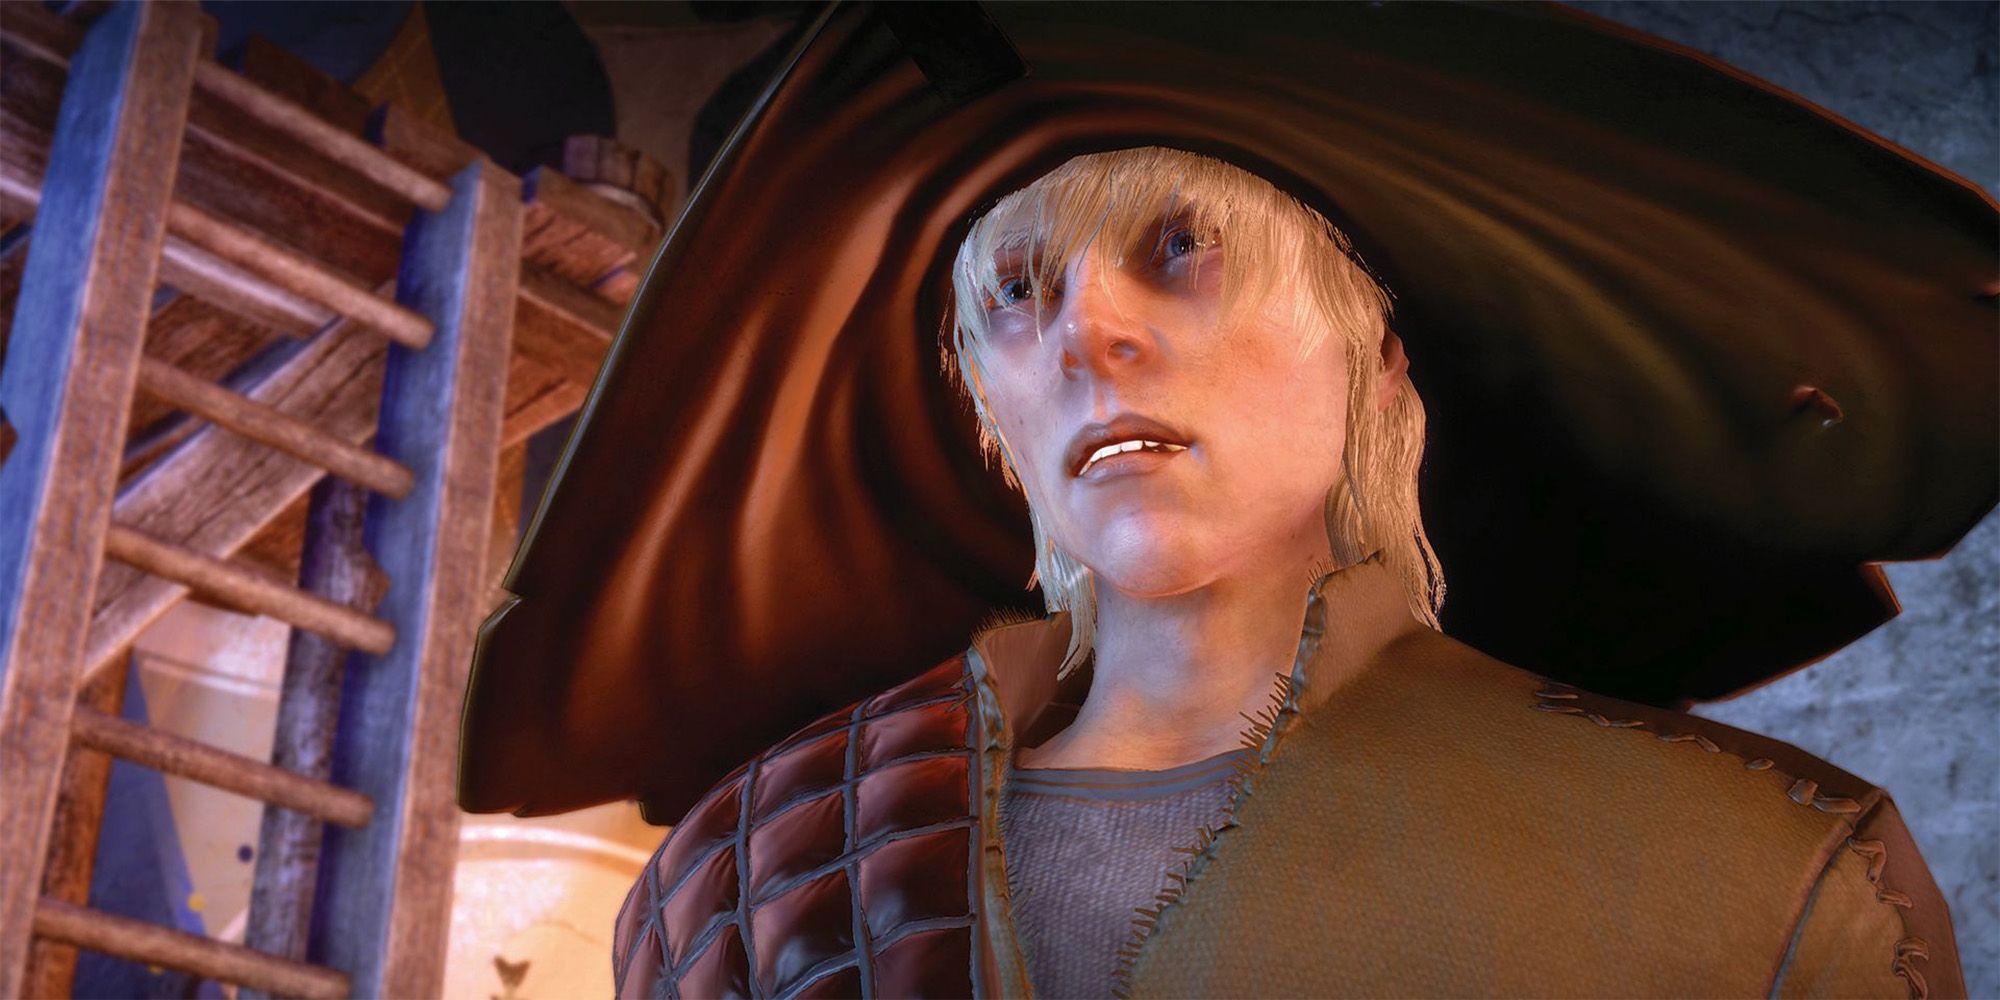 Dragon Age 10 Former Party Members Who Should Return In DA4